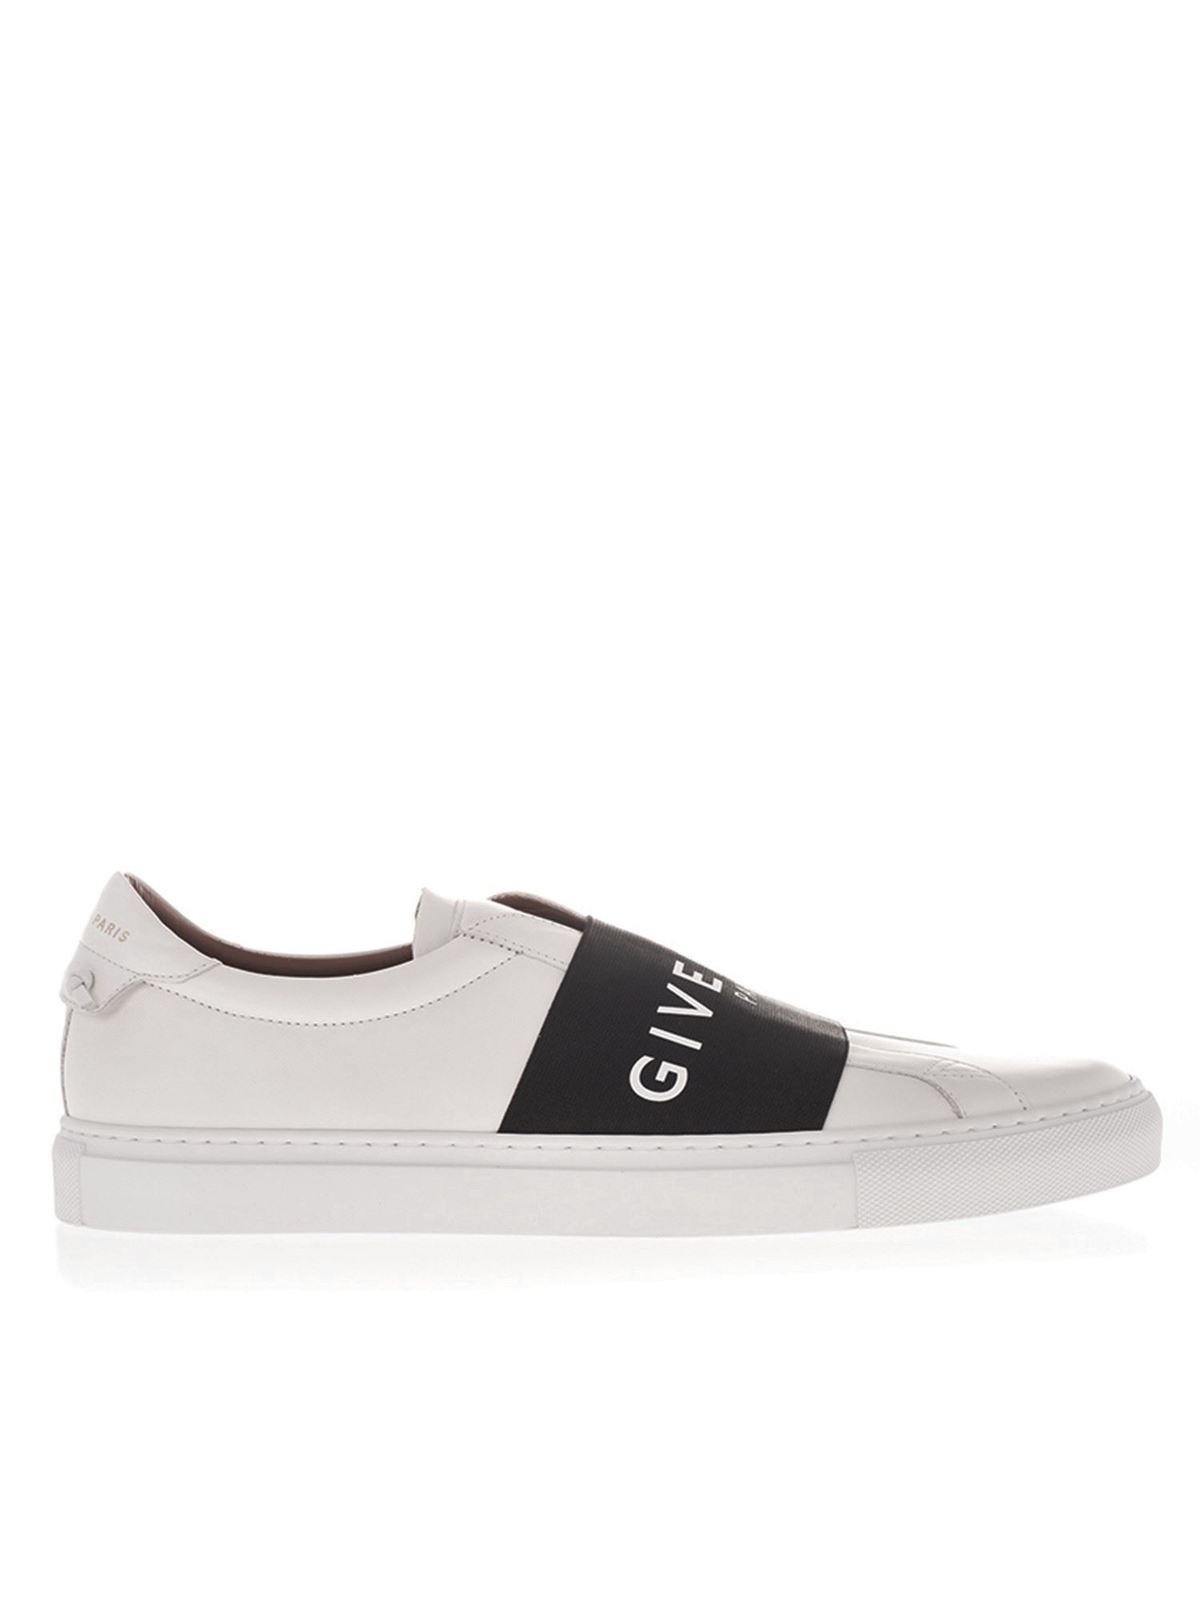 givenchy trainers black